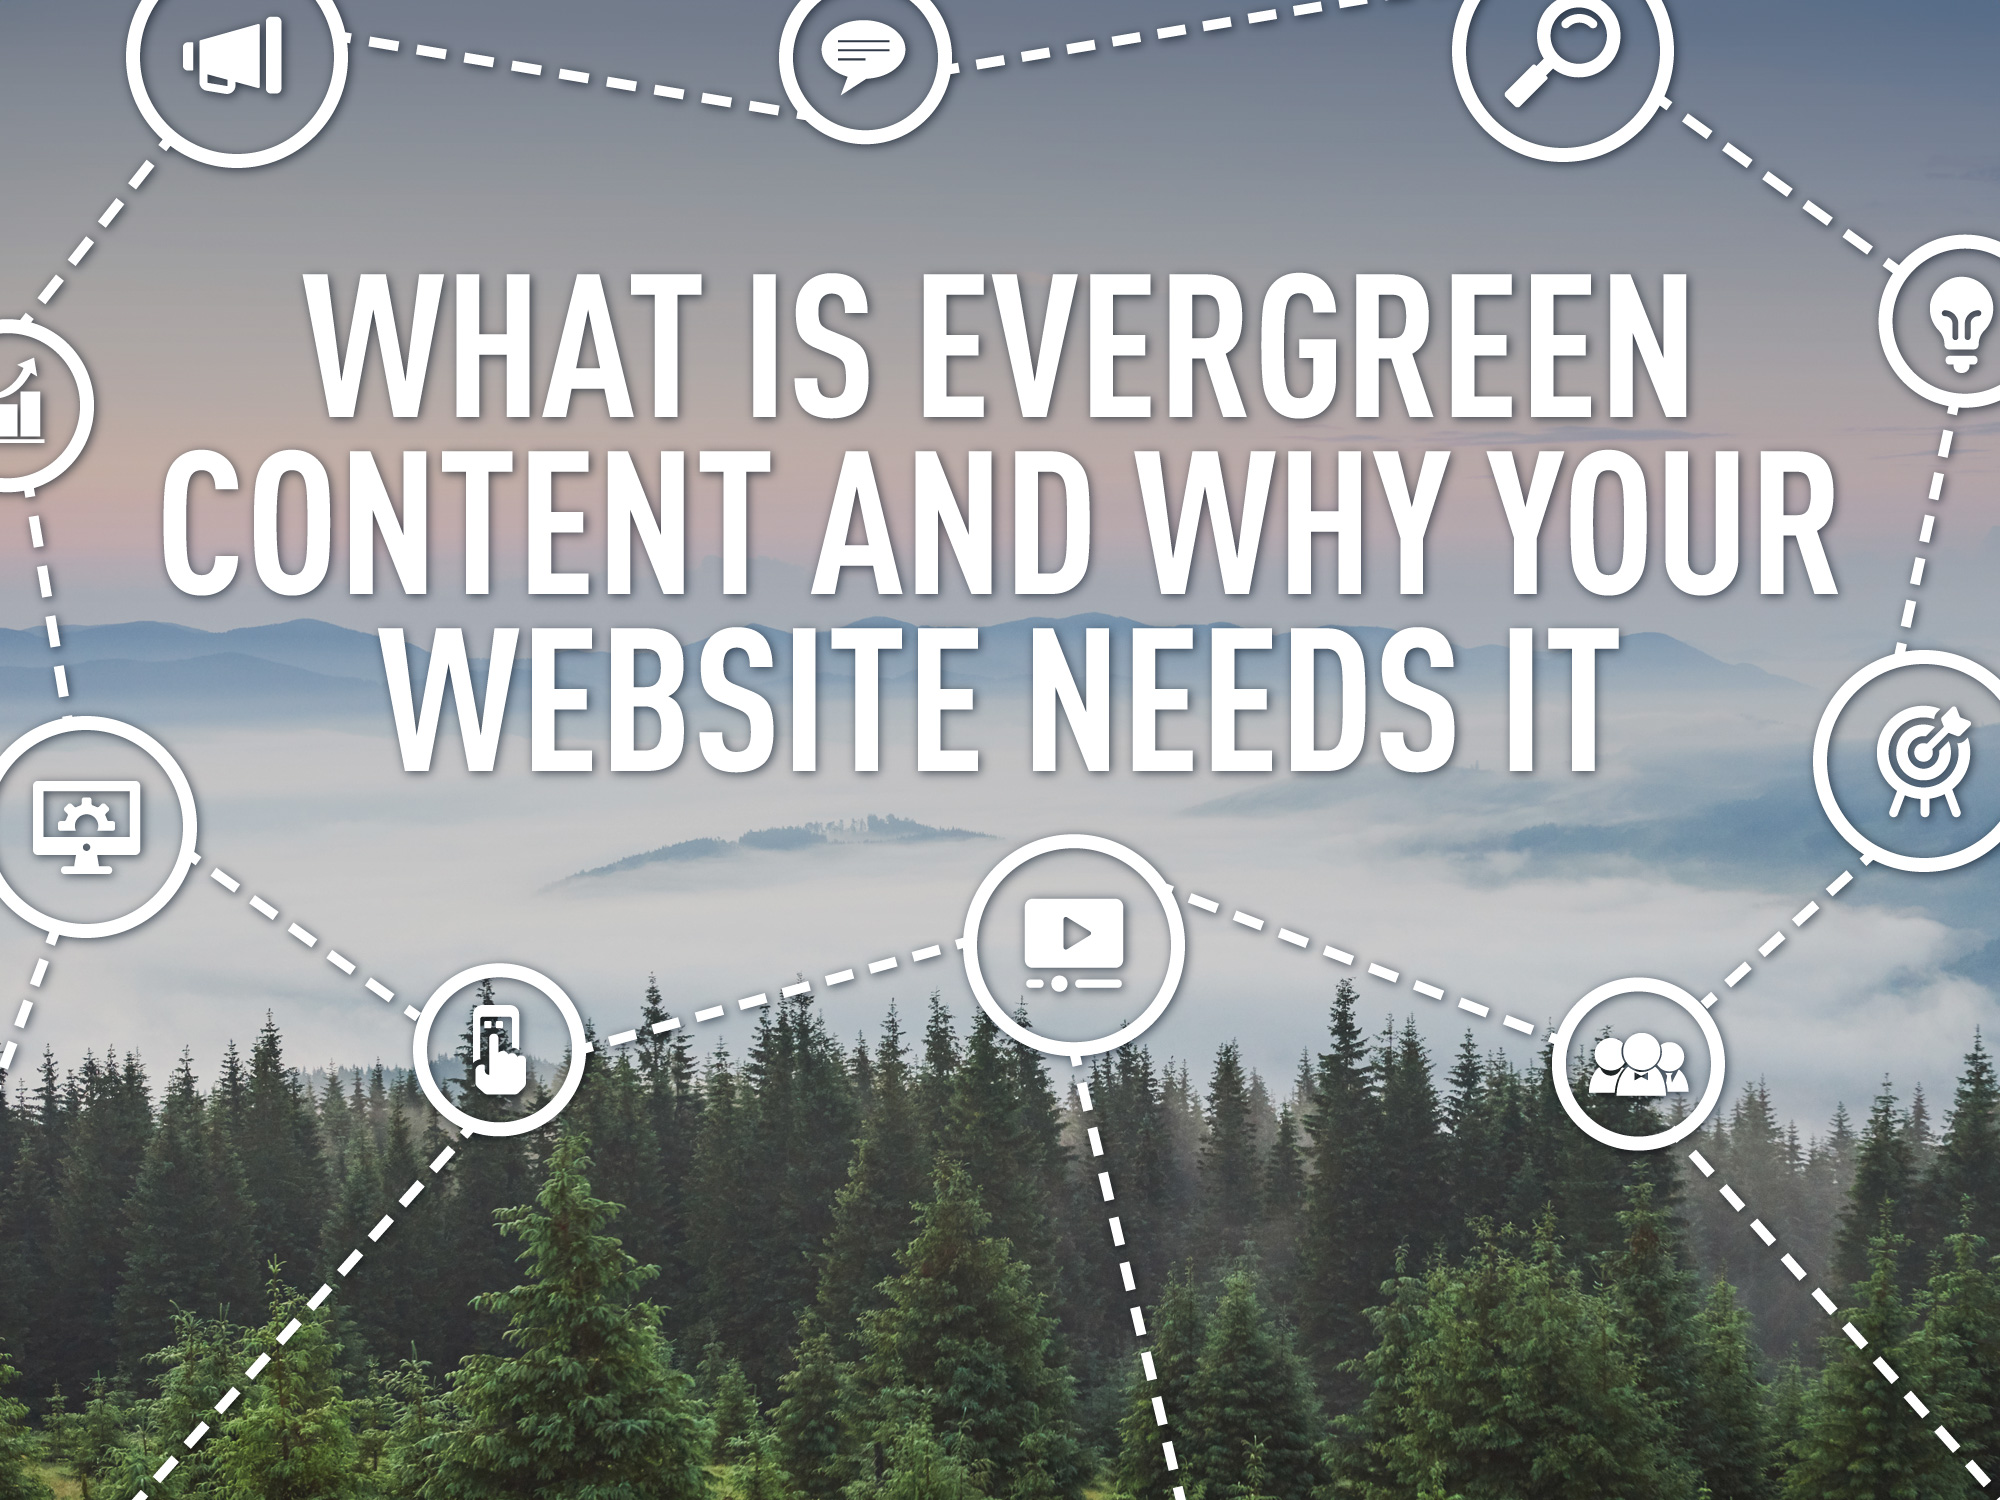 What is Evergreen Content and Why Your Website Needs It